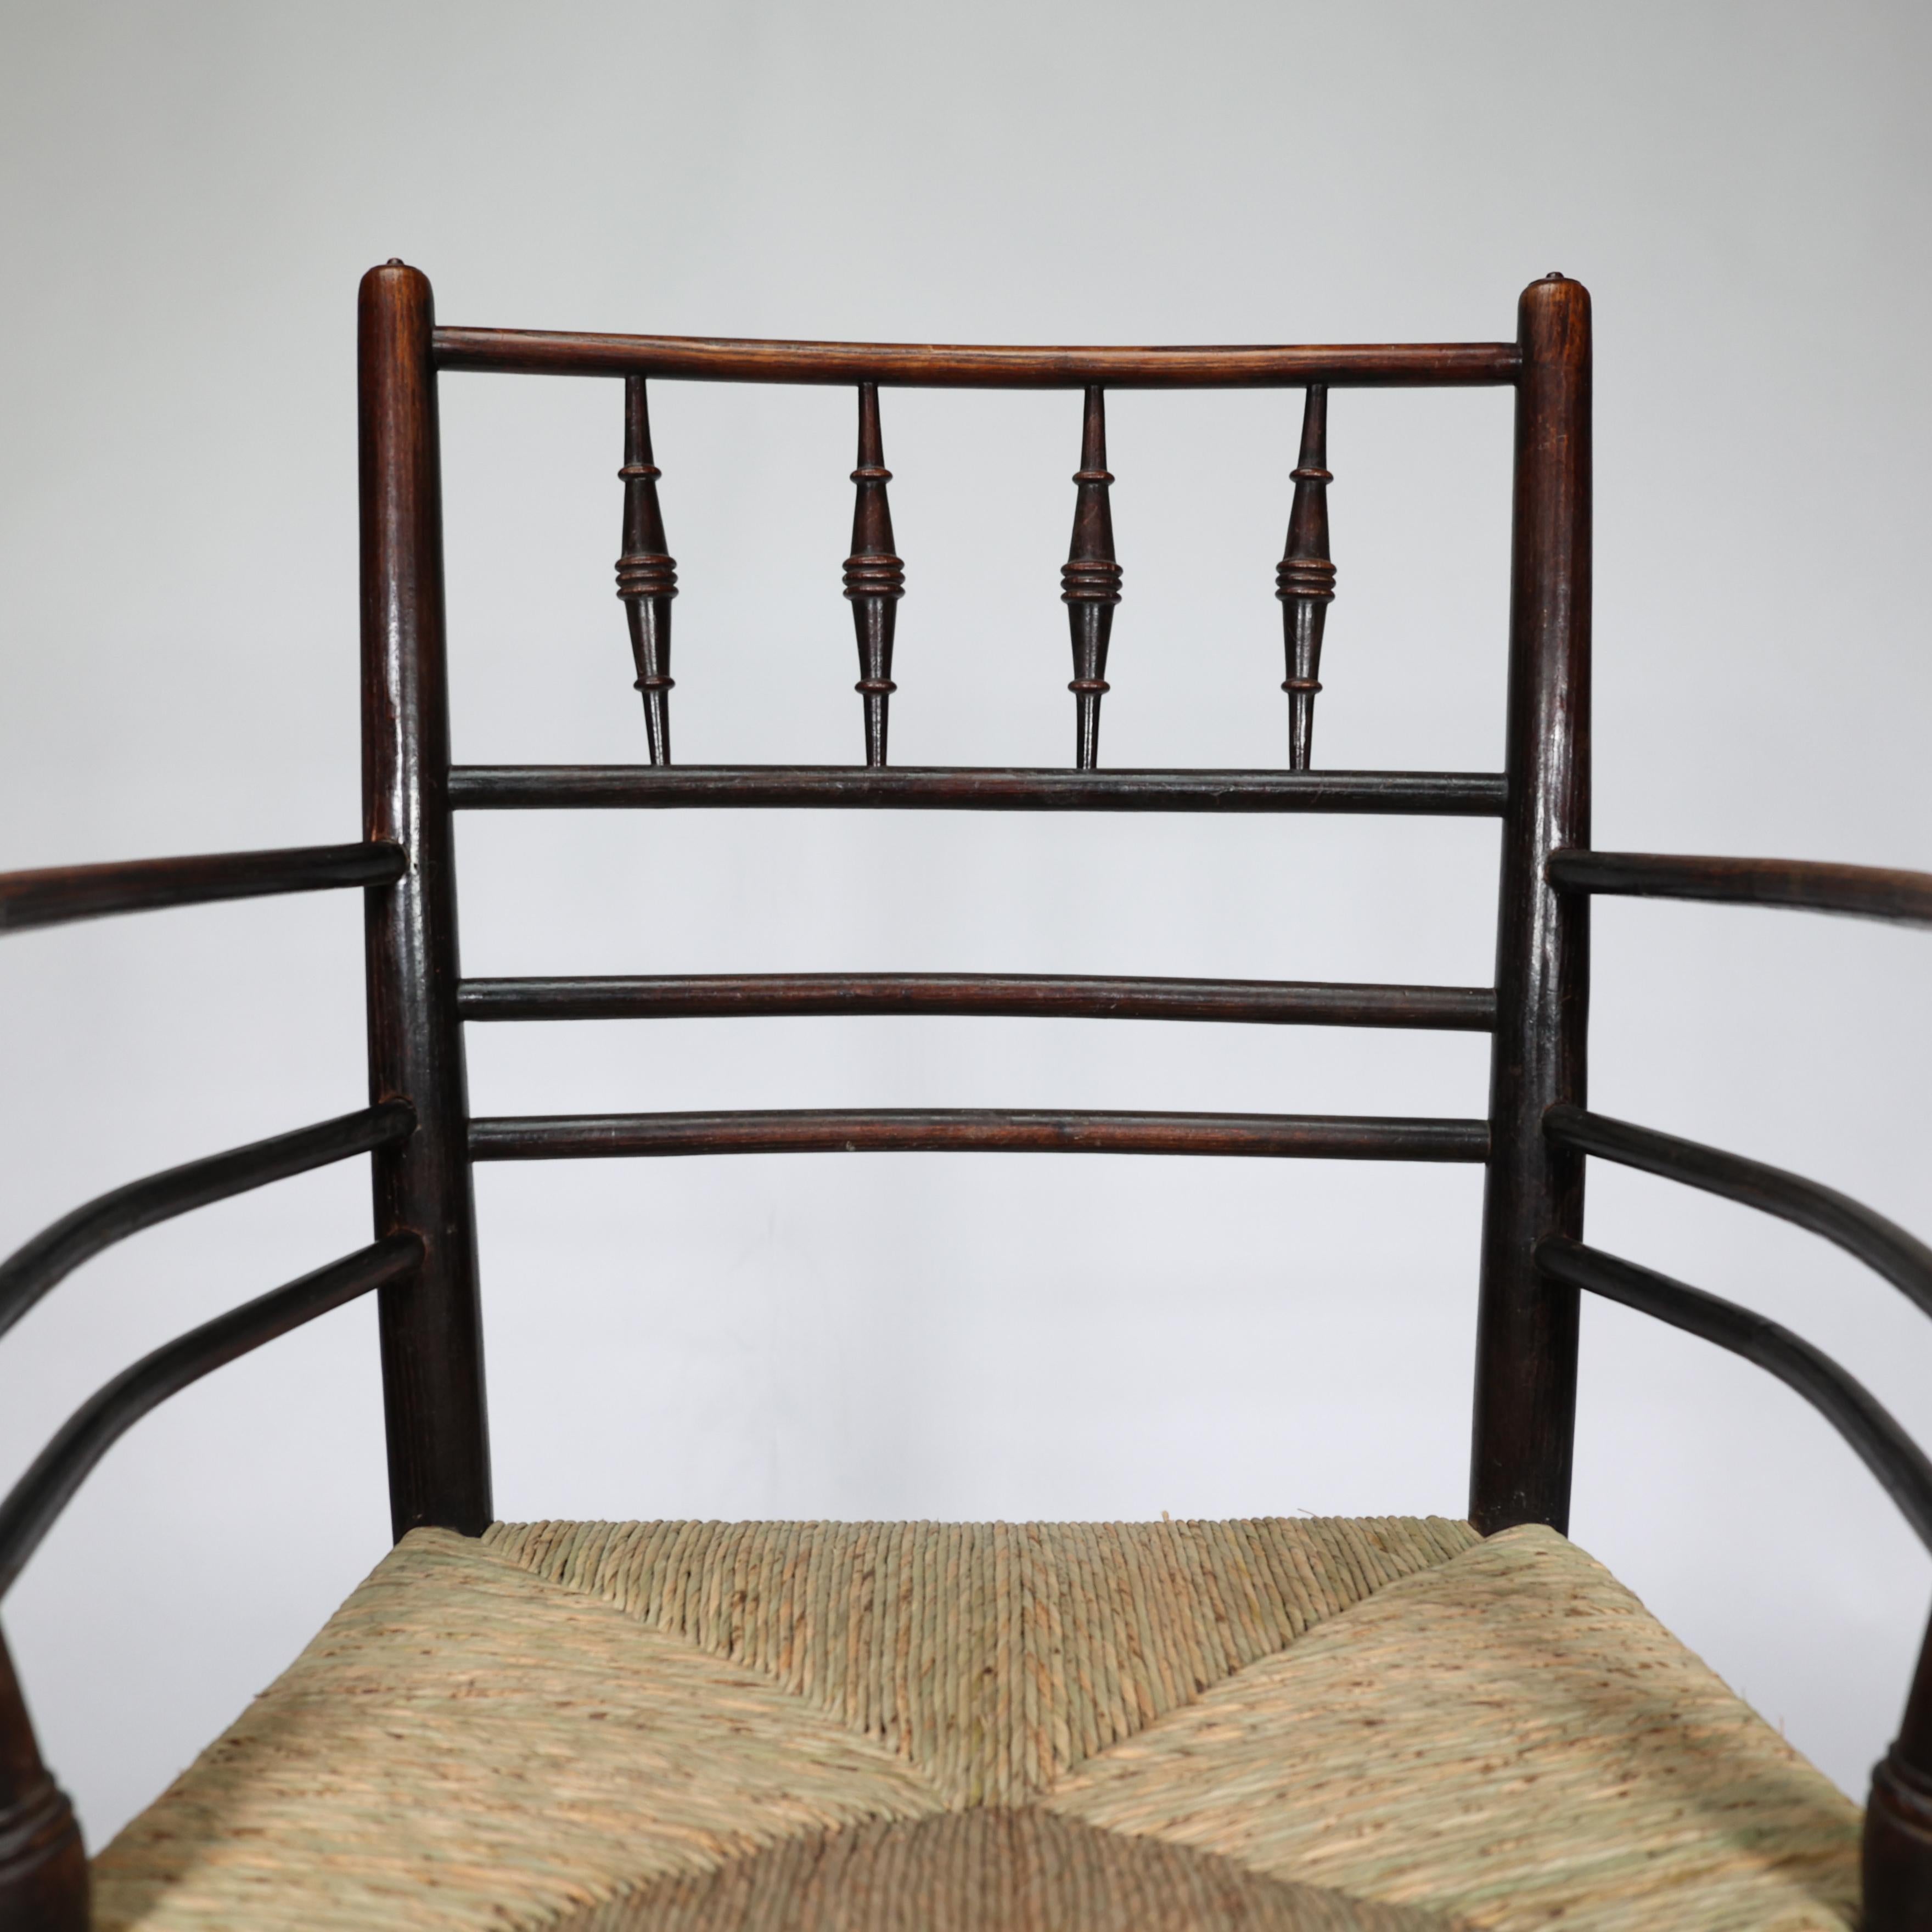 19th Century William Morris, A Classic Arts & Crafts Ebonised Armchair from the Sussex Range.